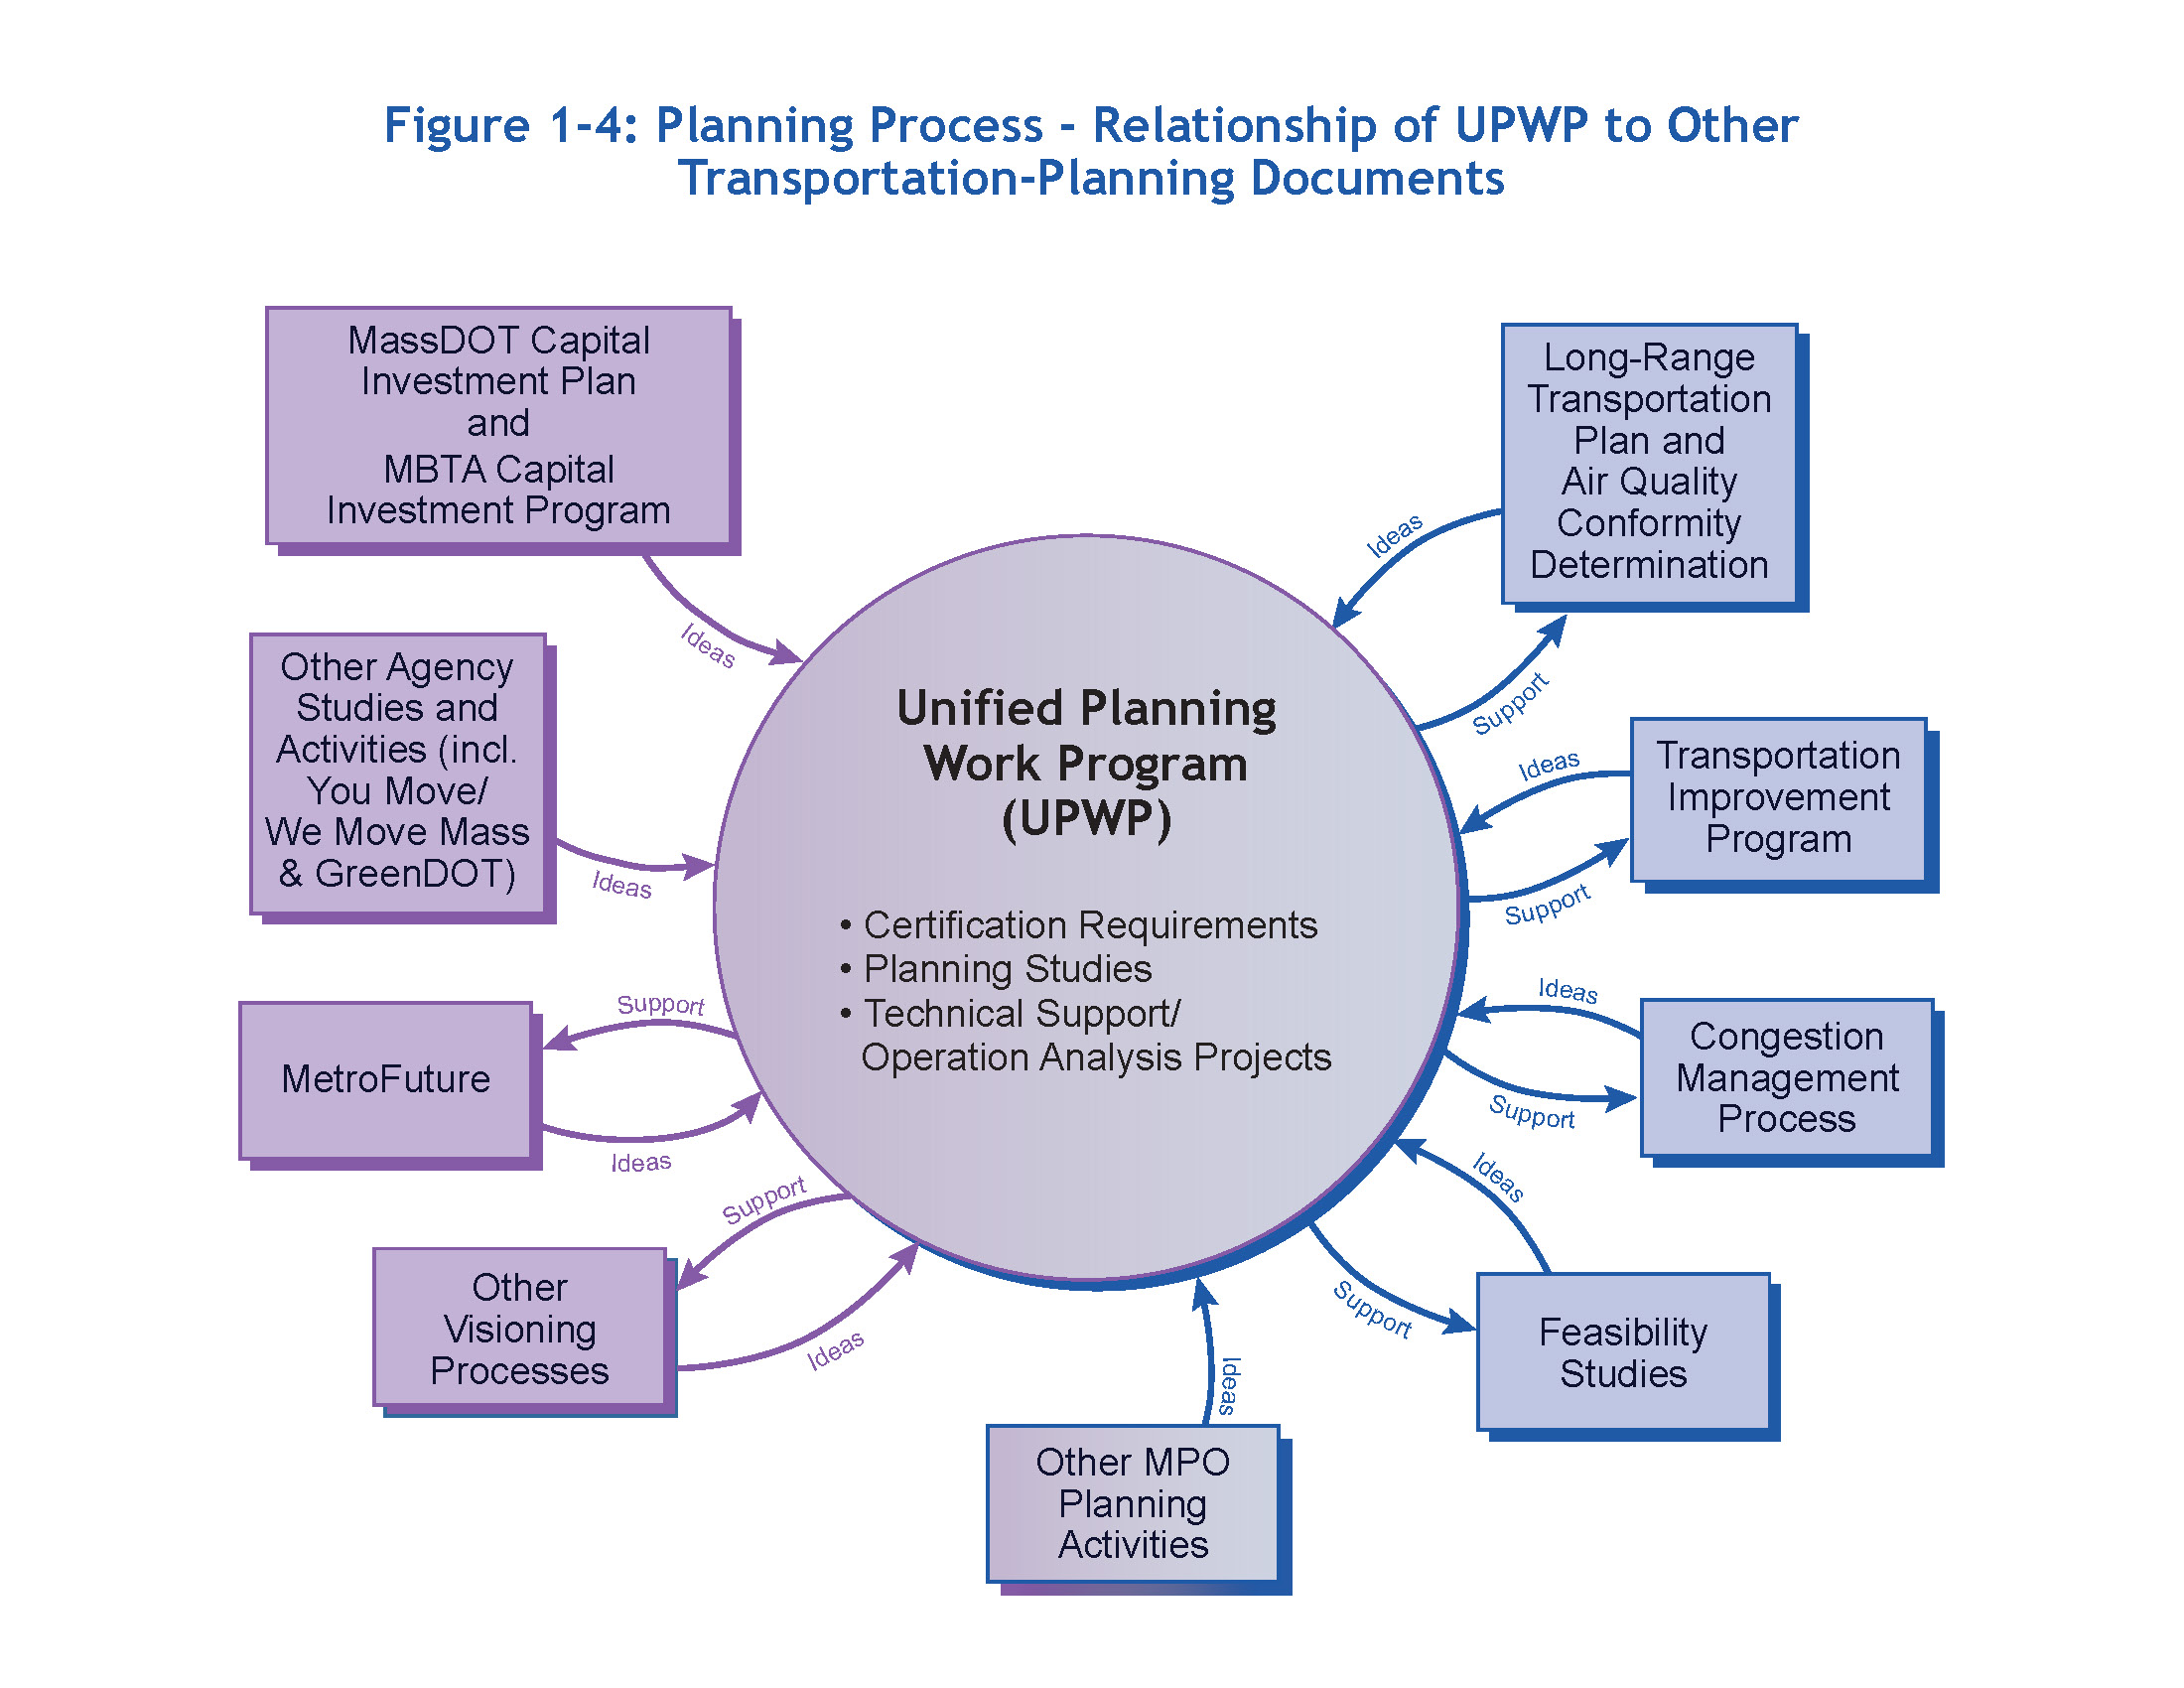 Figure 1-4: Planning Process- Relationship of UPWP to Other Transportation-Planning Documents. This figure shows how the UPWP relates to the variety of planning documents described in Section 1.3.2, “Coordination with Other Planning Activities.” Some arrows in this figure indicate the flow of support from the UPWP to different documents, and other arrows show the flow of ideas from various documents into the UPWP.